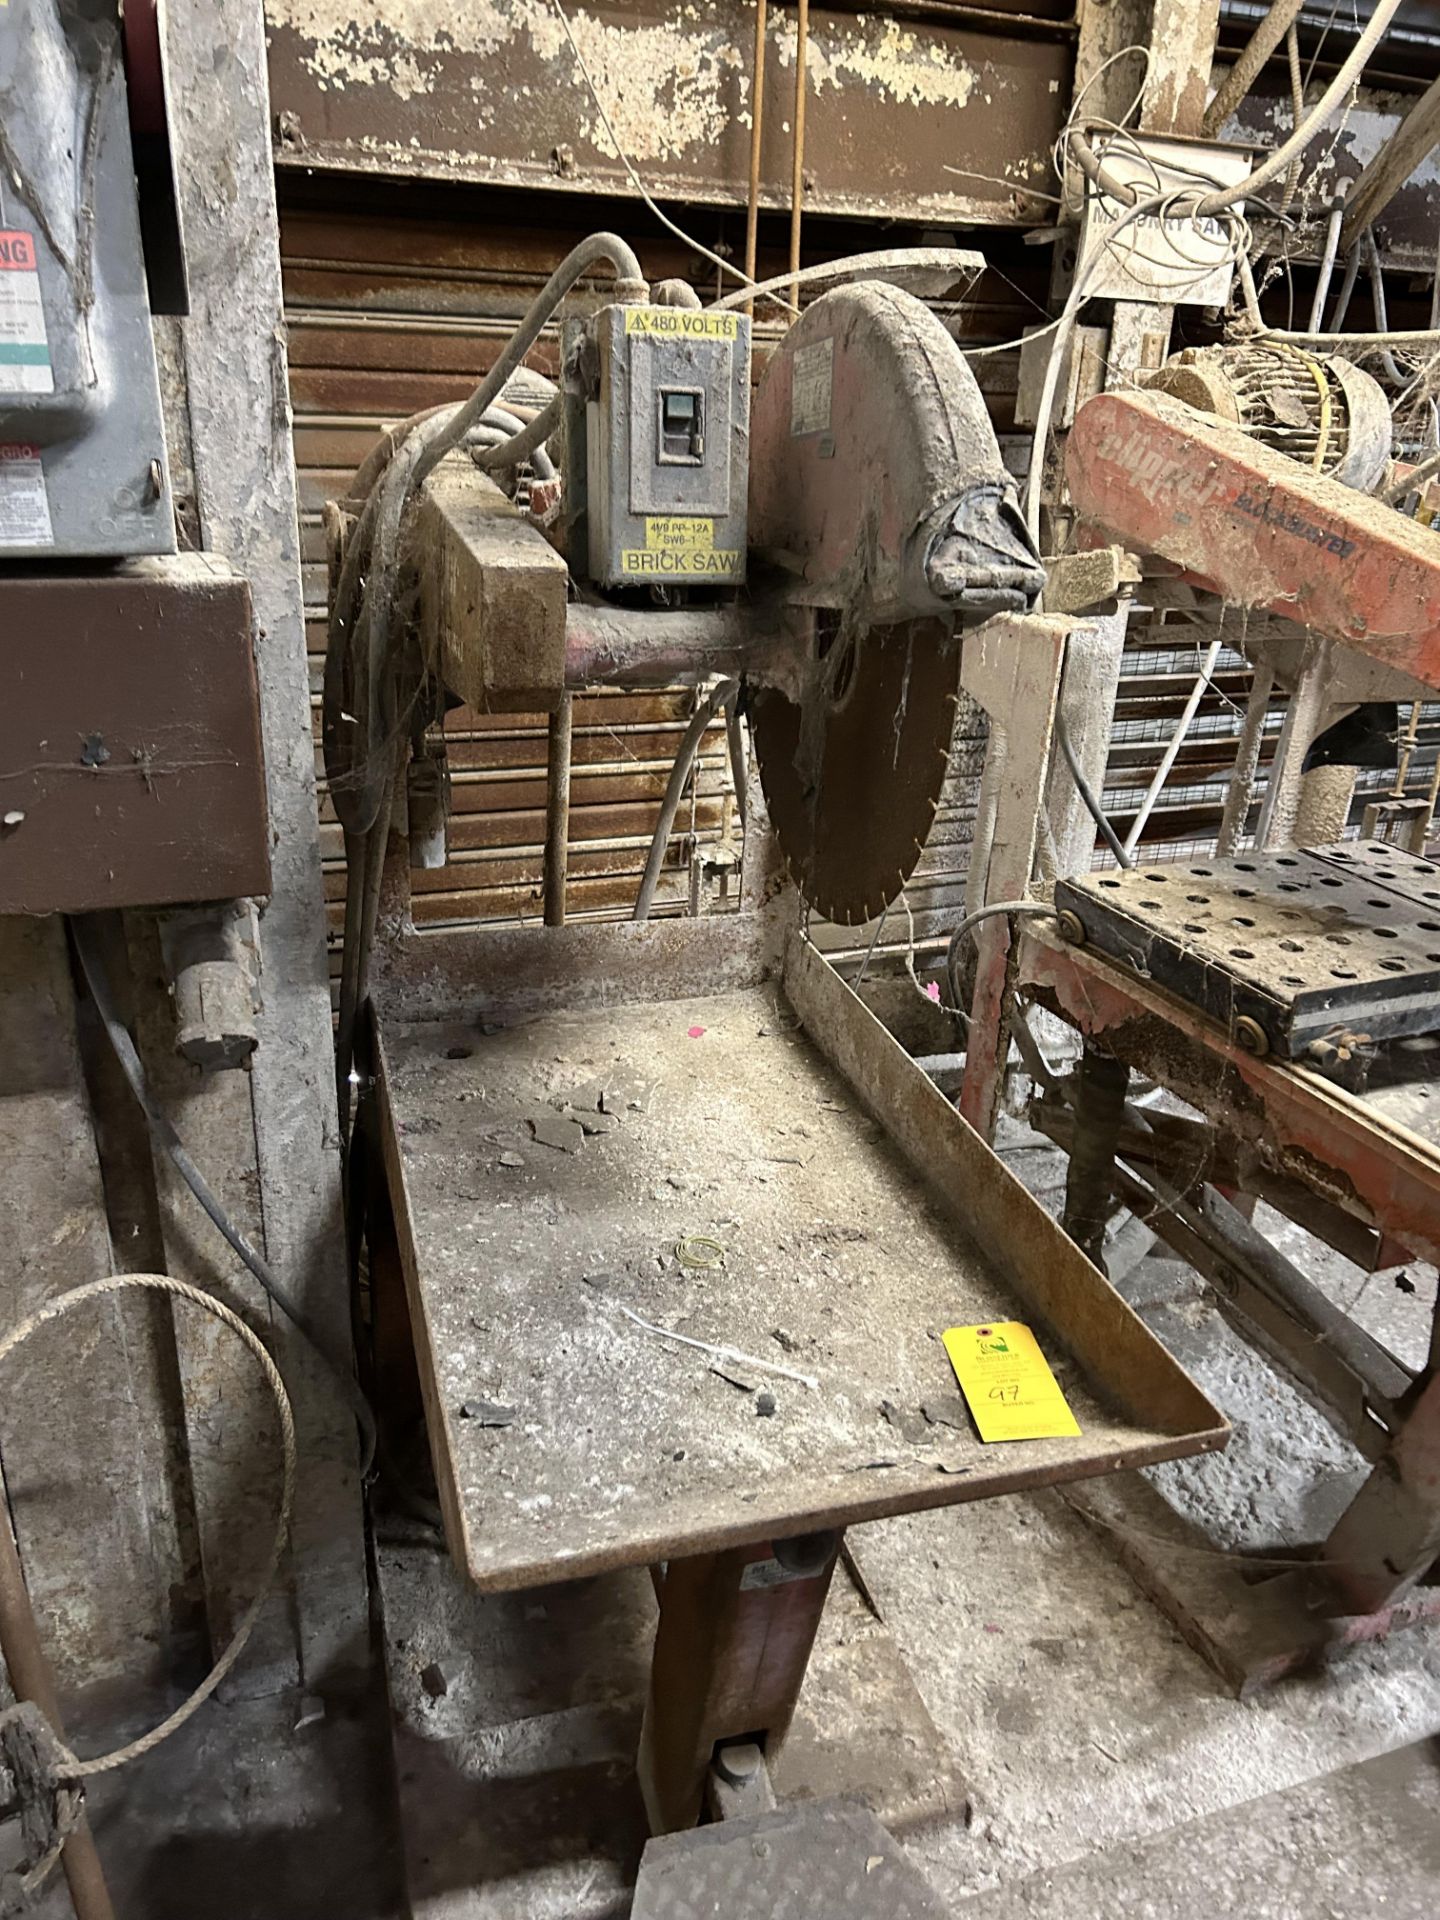 Brick Saw, Rigging/ Removal Fee - $150 - Image 2 of 3